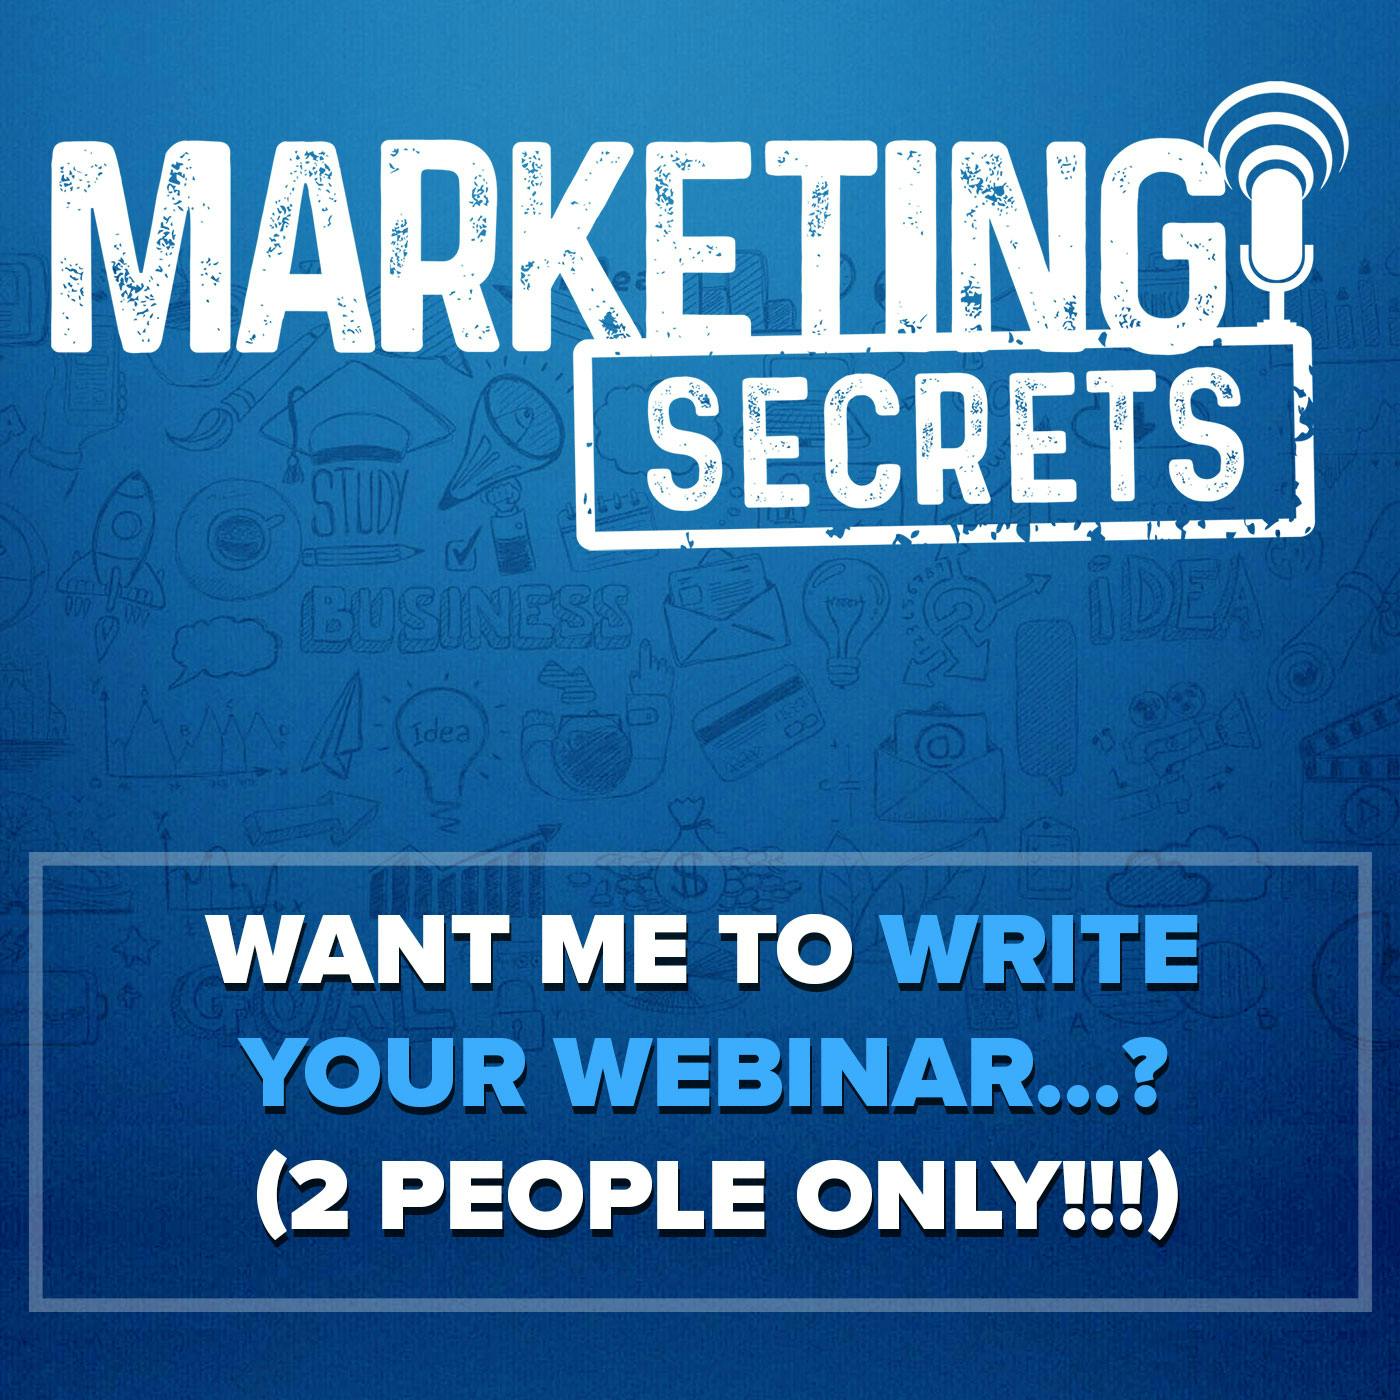 Want Me To Write Your Webinar... (2 People Only!!!)